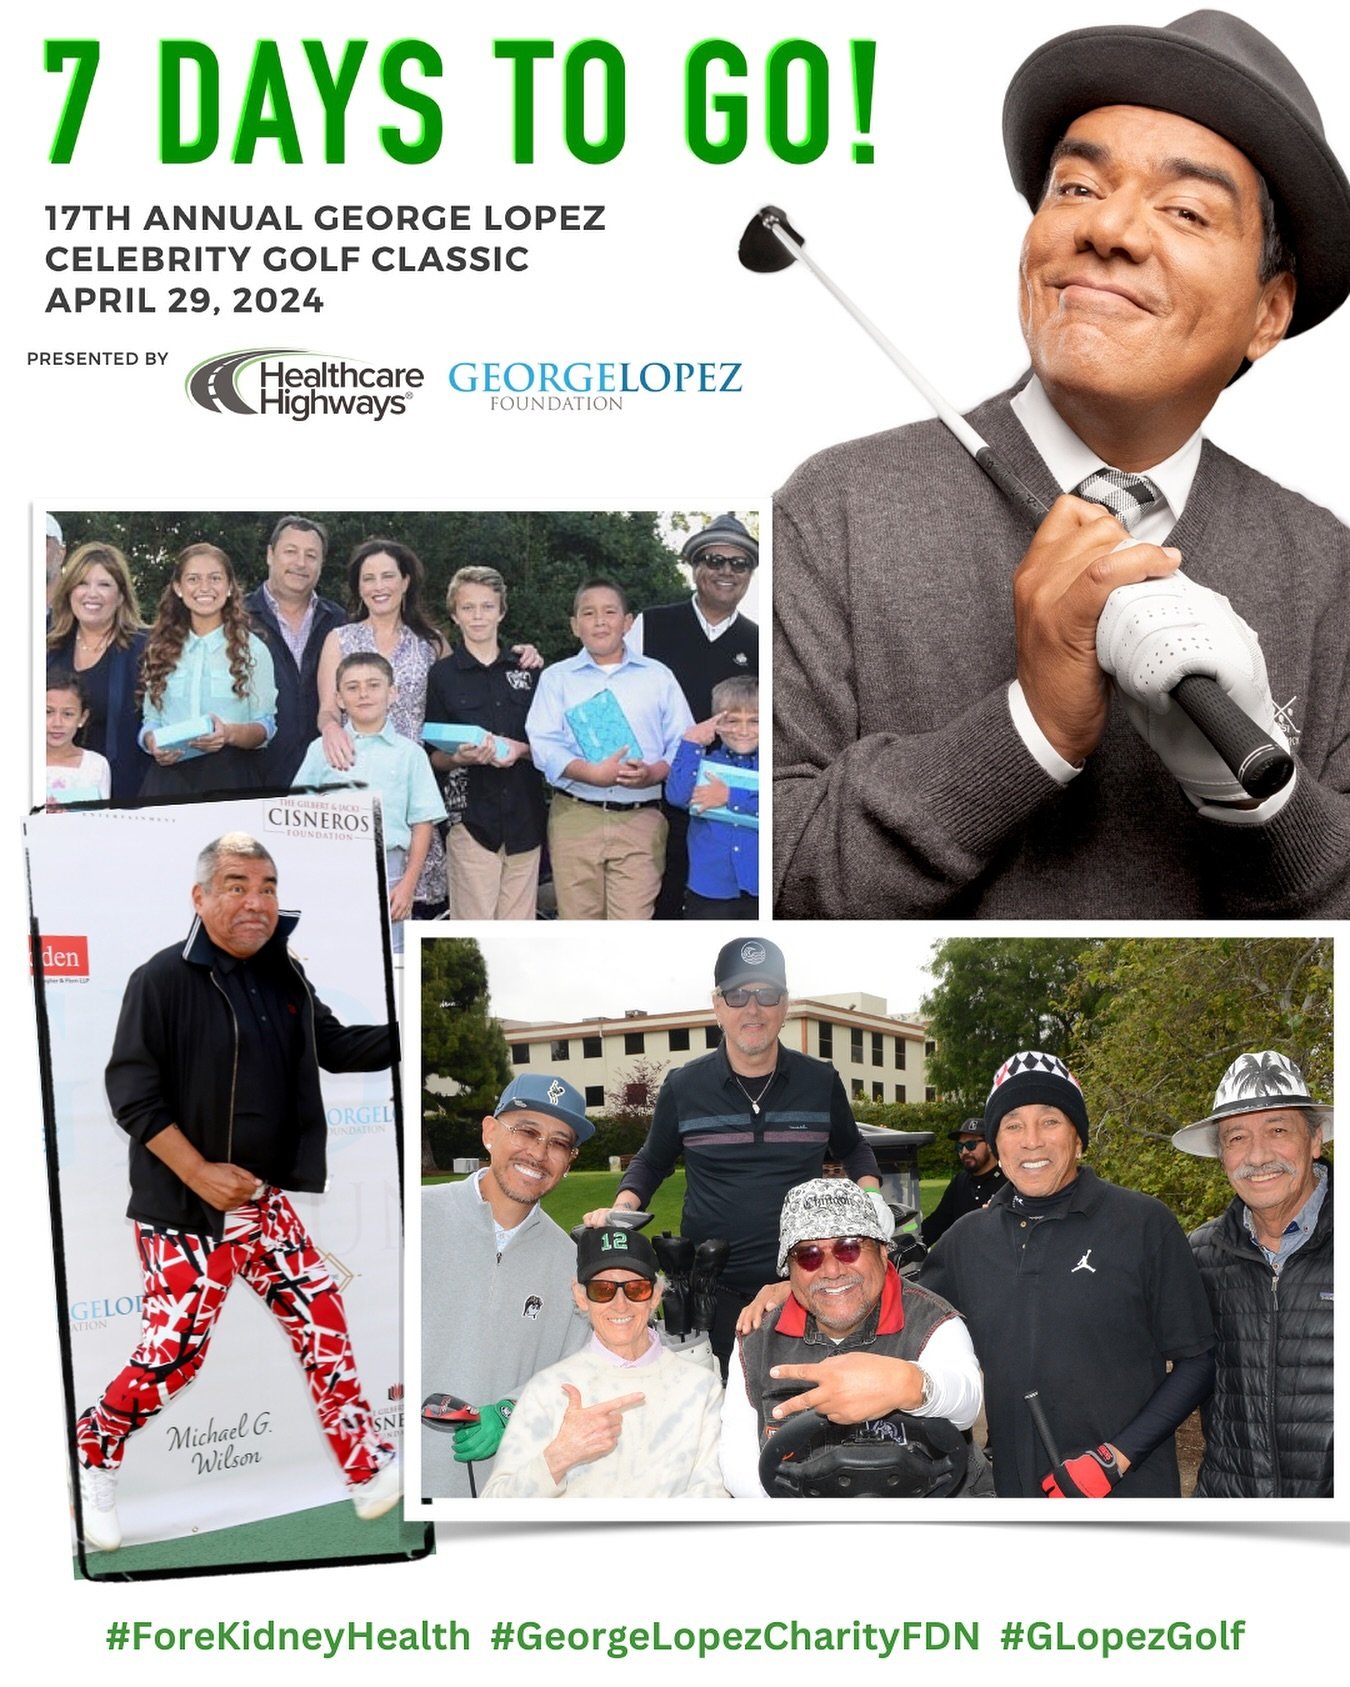 The 17th Annual George Lopez Celebrity Golf Classic is just a week away! We cannot wait for another chance to spend time with amazing people for a great cause!

Special thanks to our Title Sponsor Healthcare Highways and Board Members Stacey and Larr